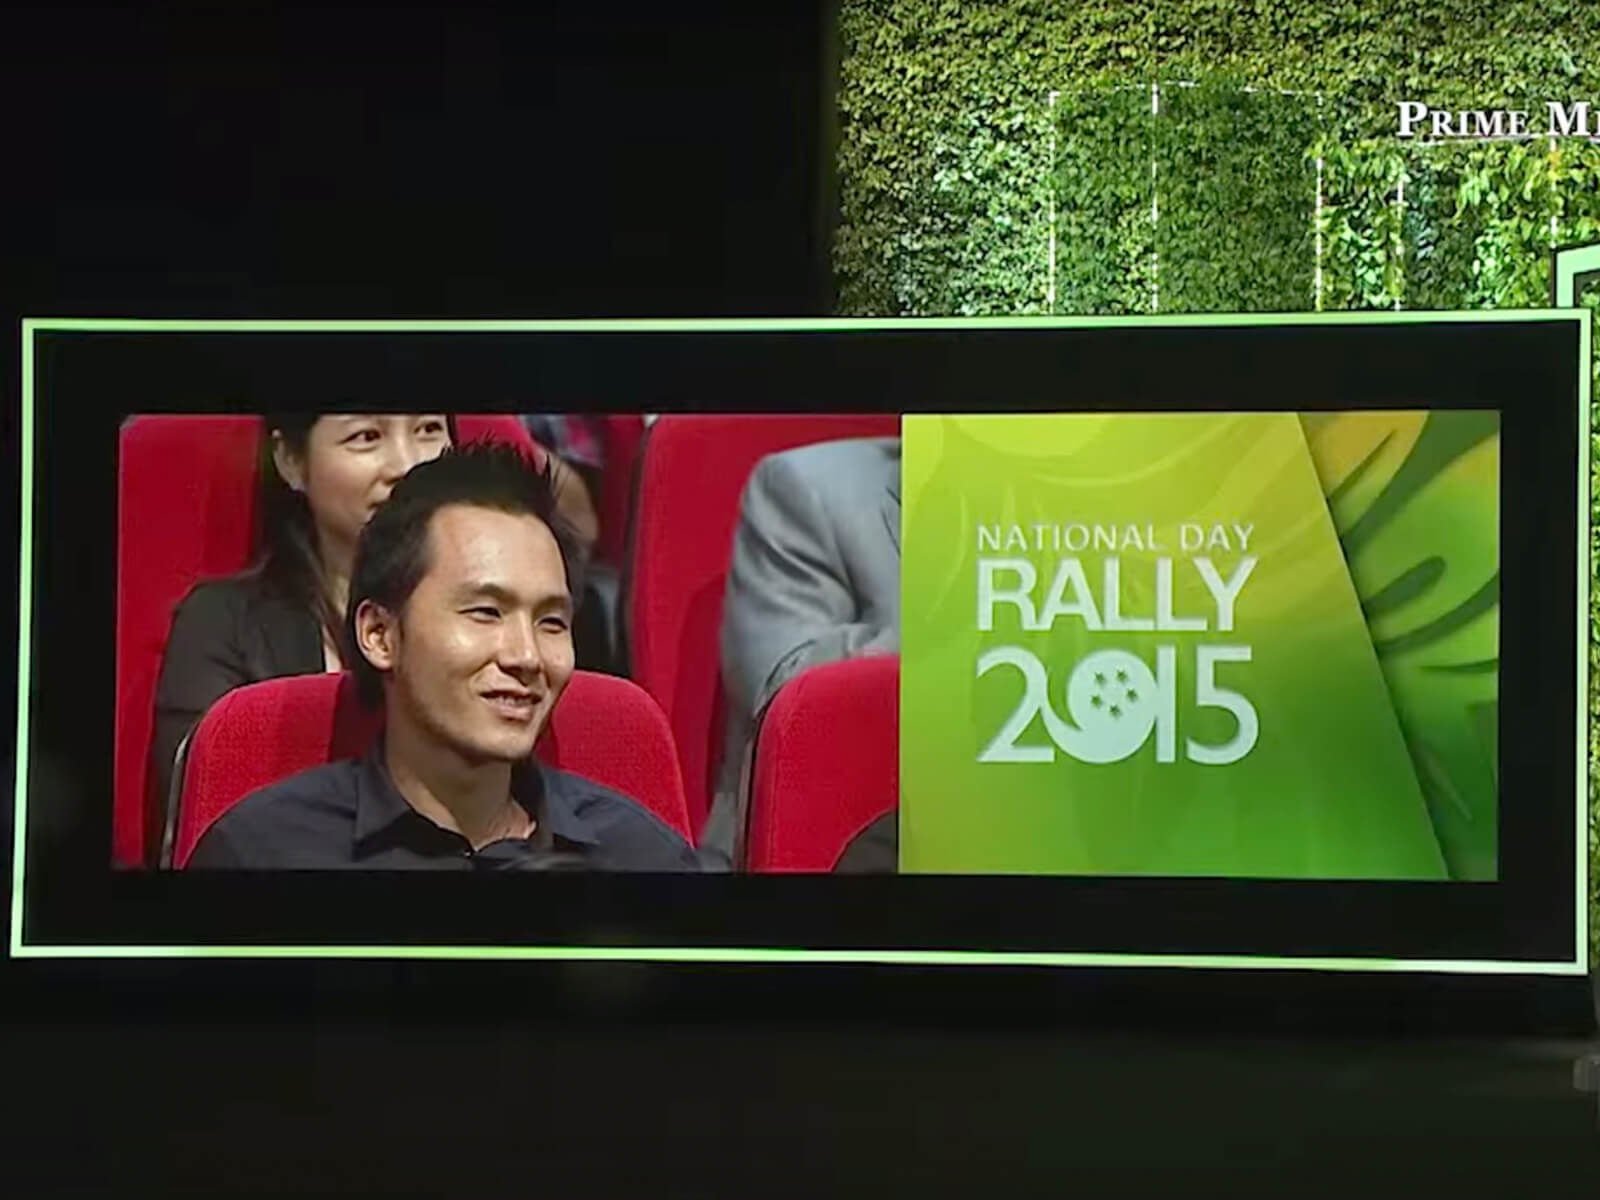 DigiPen alumnus Chen Zhangkai appears on a large screen next to Singapore Prime Minister Loong giving a speech on stage